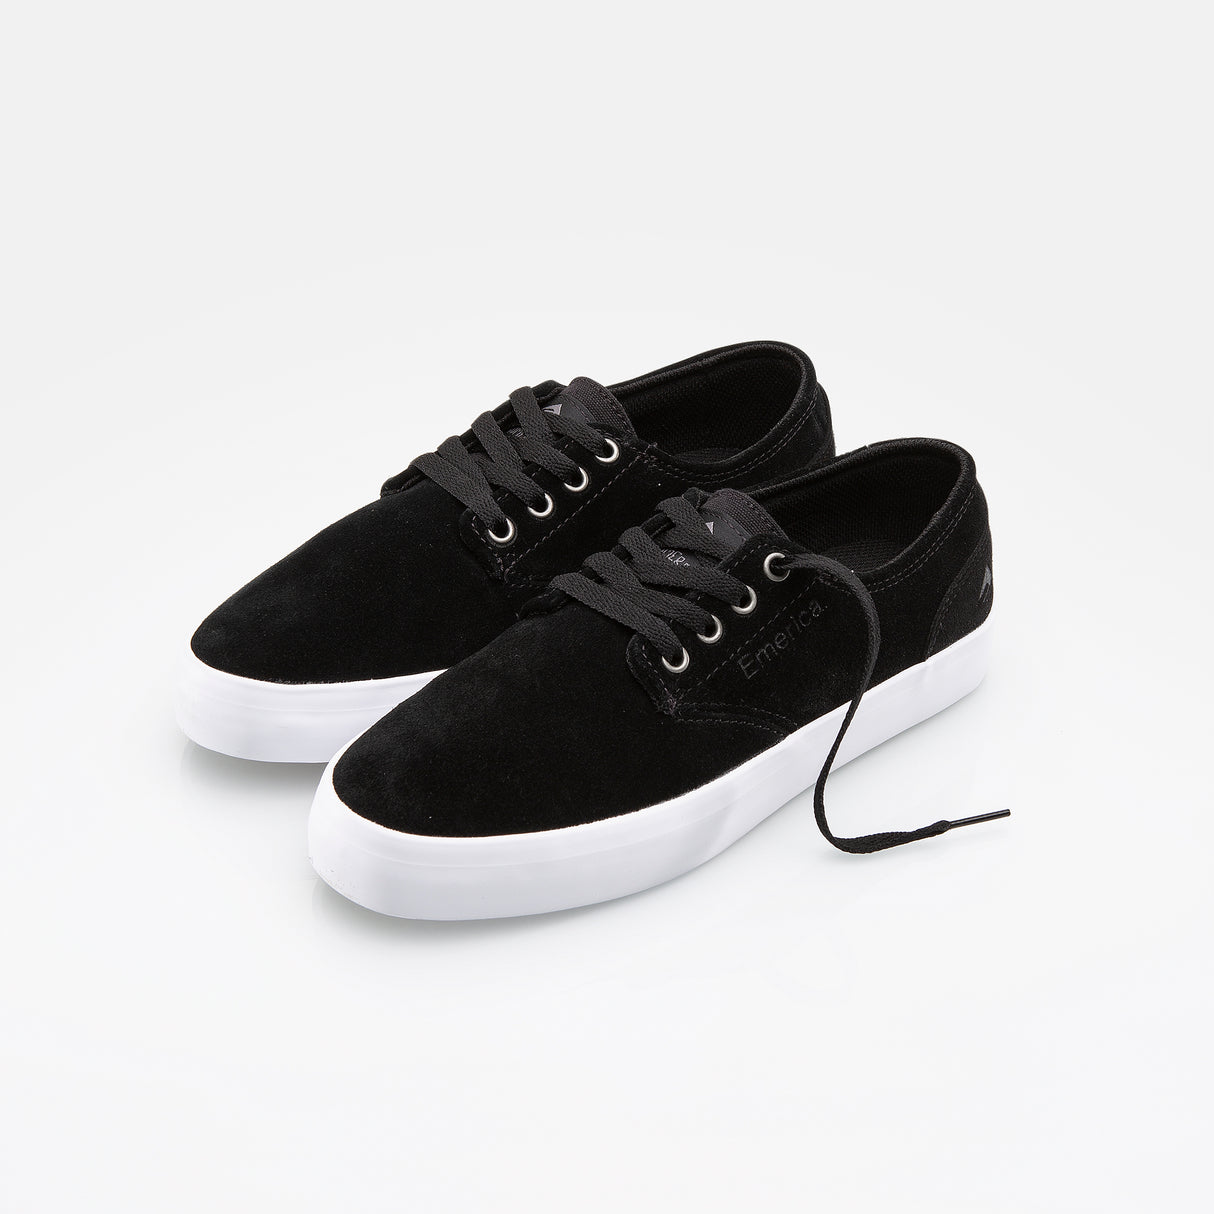 Emerica Youth Romero Laced Black/White/Gum Shoes